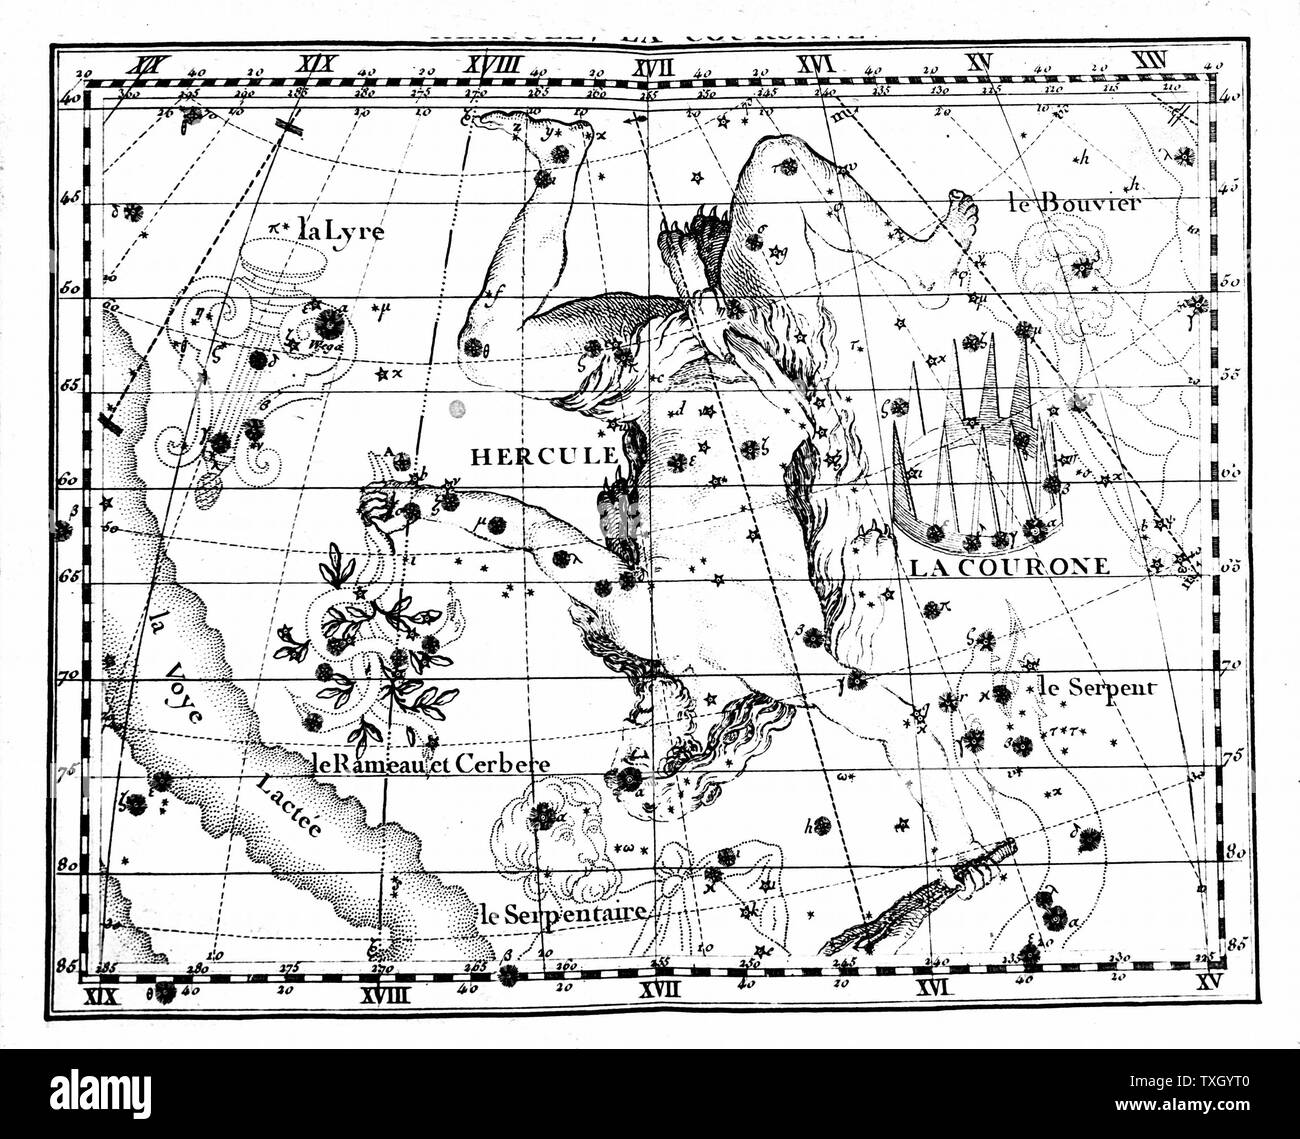 Constellation of Hercules (Heracles/Herakles): part of the Milky Way is shown on right of image. From JJ Fortin 'Atlas Coelestis of Flamsteed', Paris 1775. Copperplate engraving Stock Photo